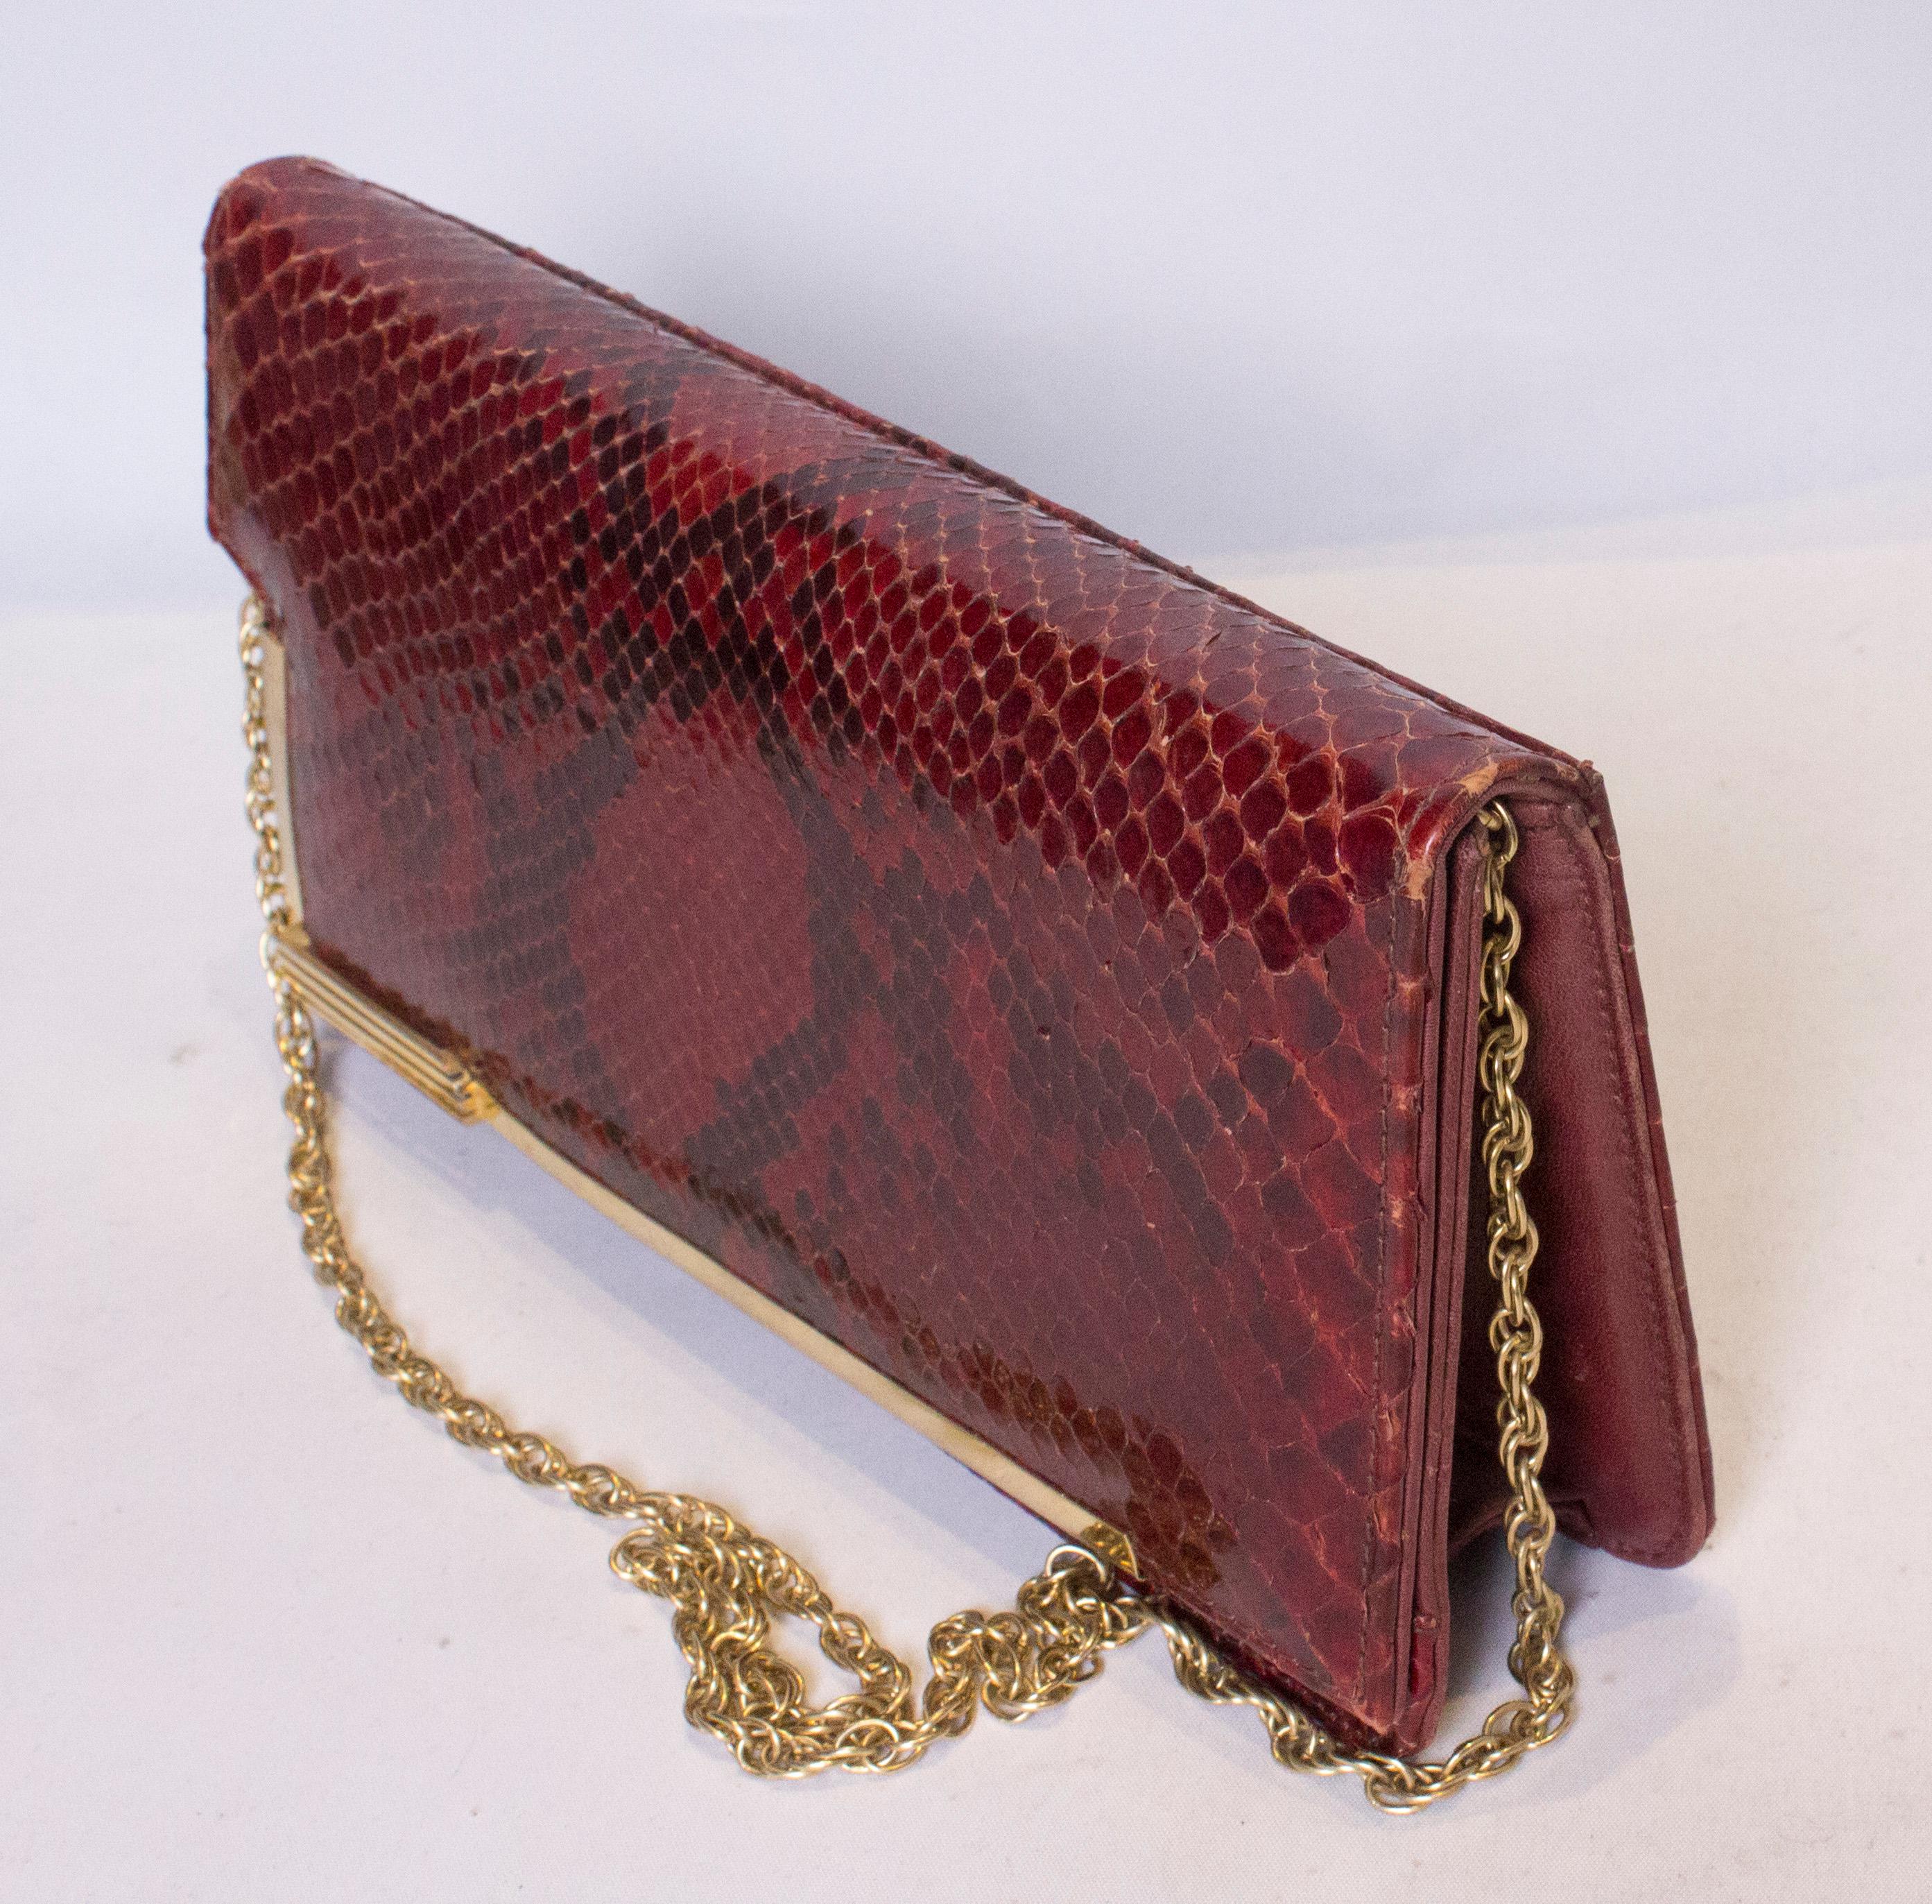 A chic vintage snakeskin handbag with gilt trim and chain handle.  The bag has a popper fastening and internally there is a zip pocket.
Mesurements : width 11'' , height 6'' depth 2''